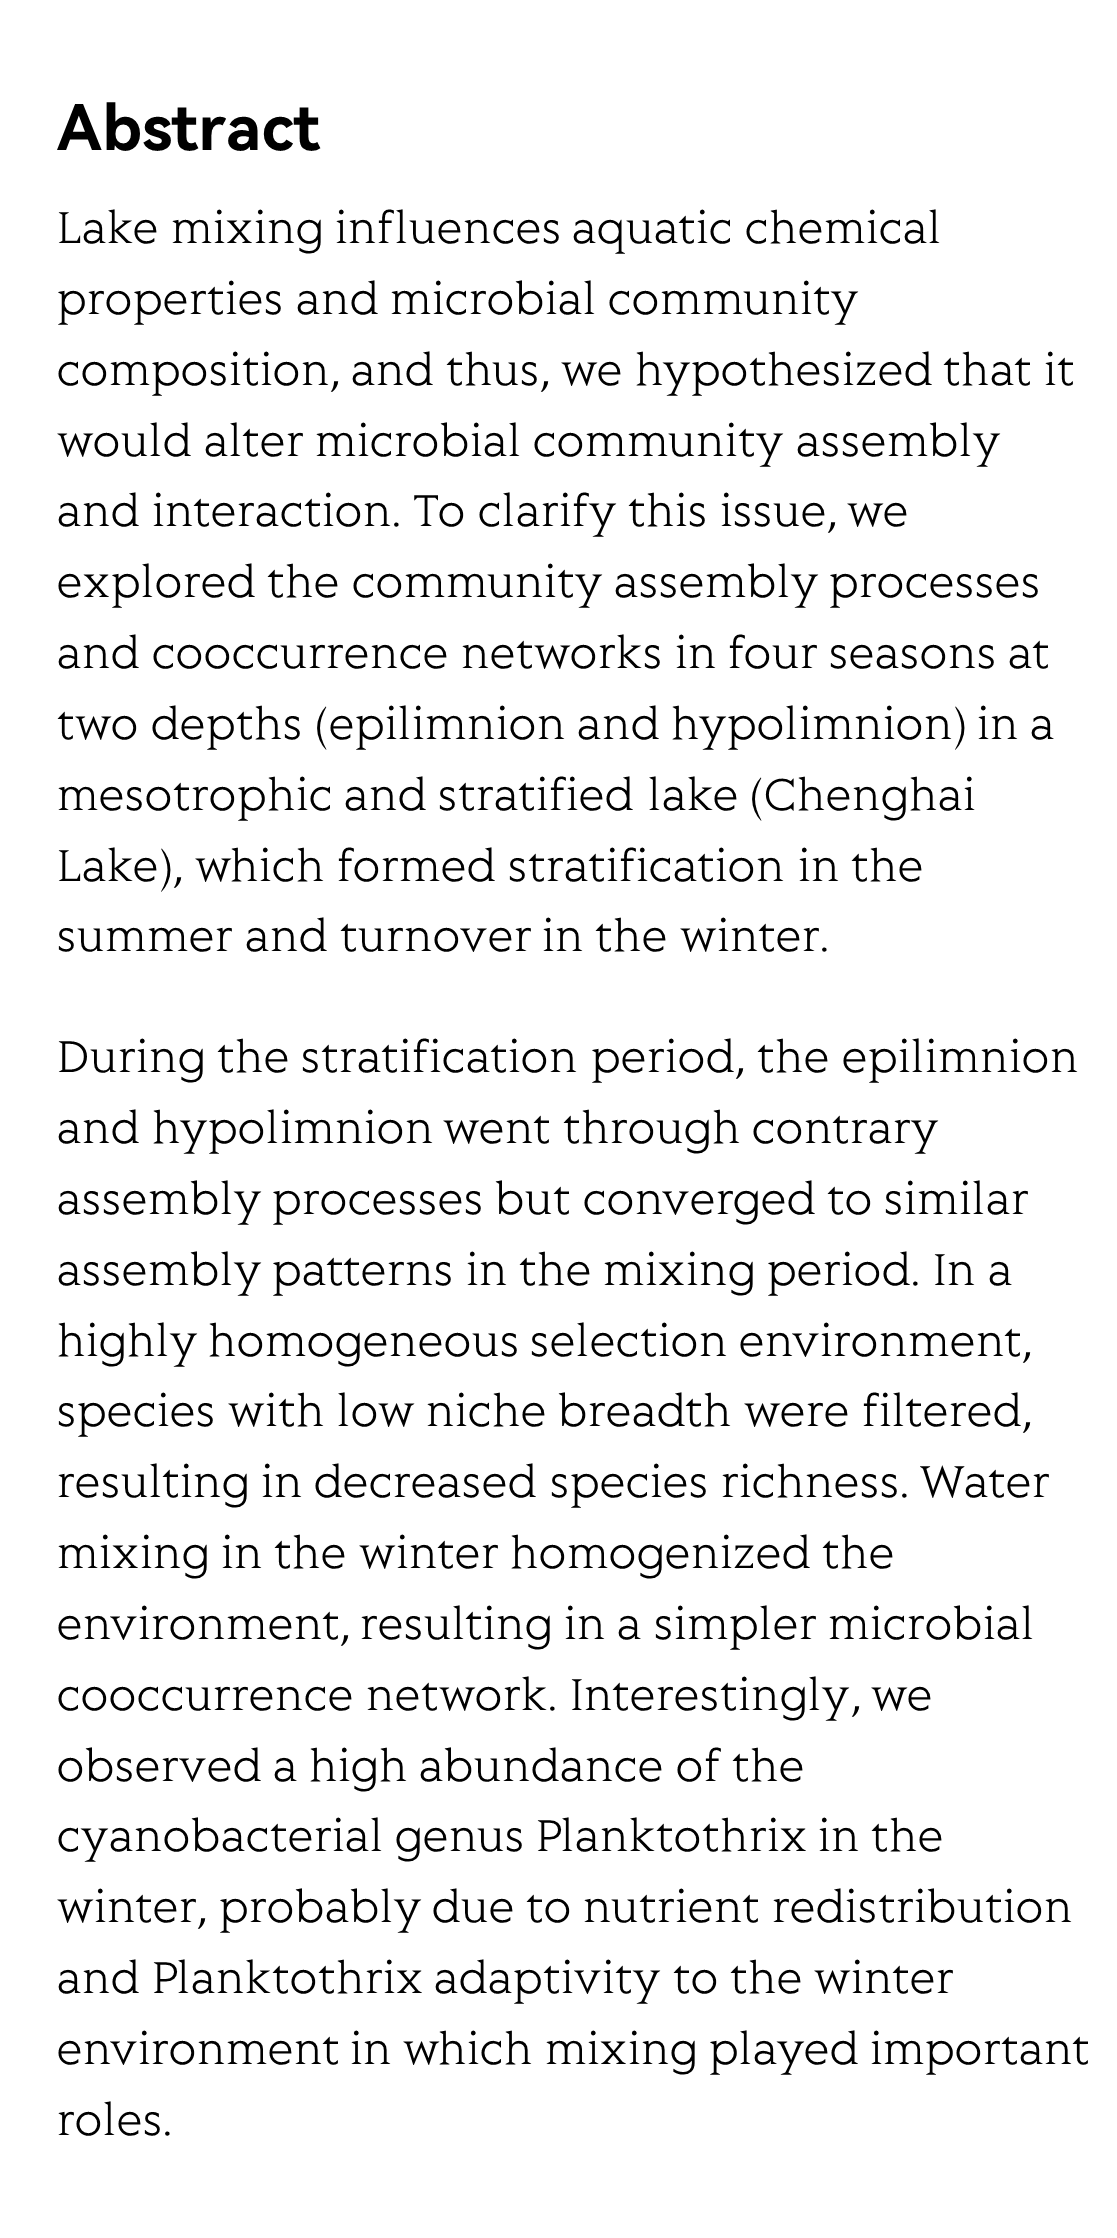 Mixing regime shapes the community assembly process, microbial interaction and proliferation of cyanobacterial species Planktothrix in a stratified lake_2